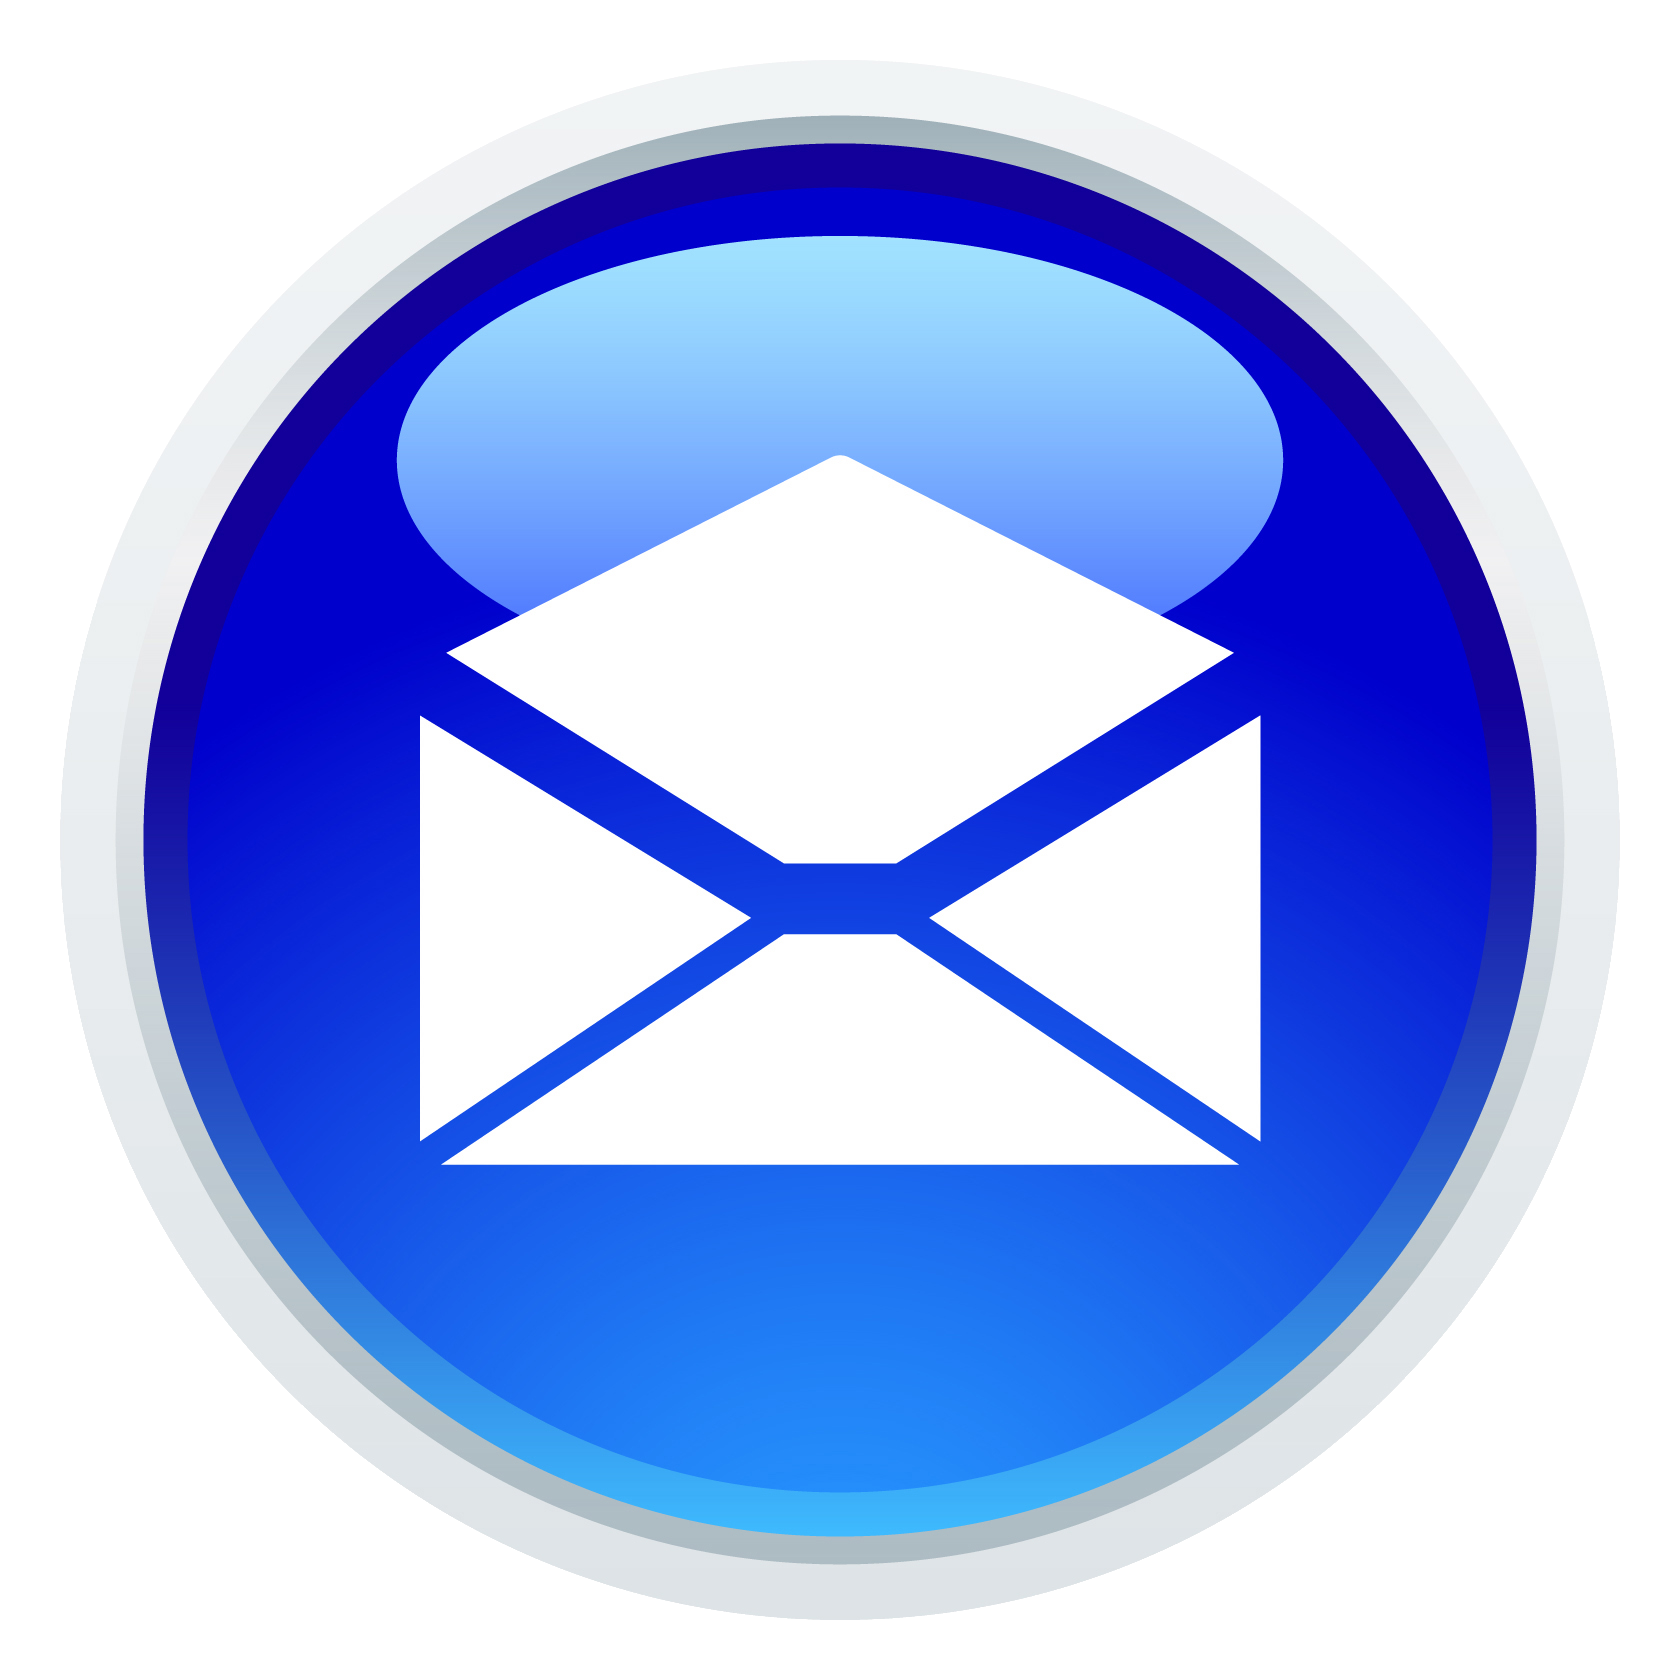 35 E Mail Logo Free Cliparts That You Can Download To You Computer And